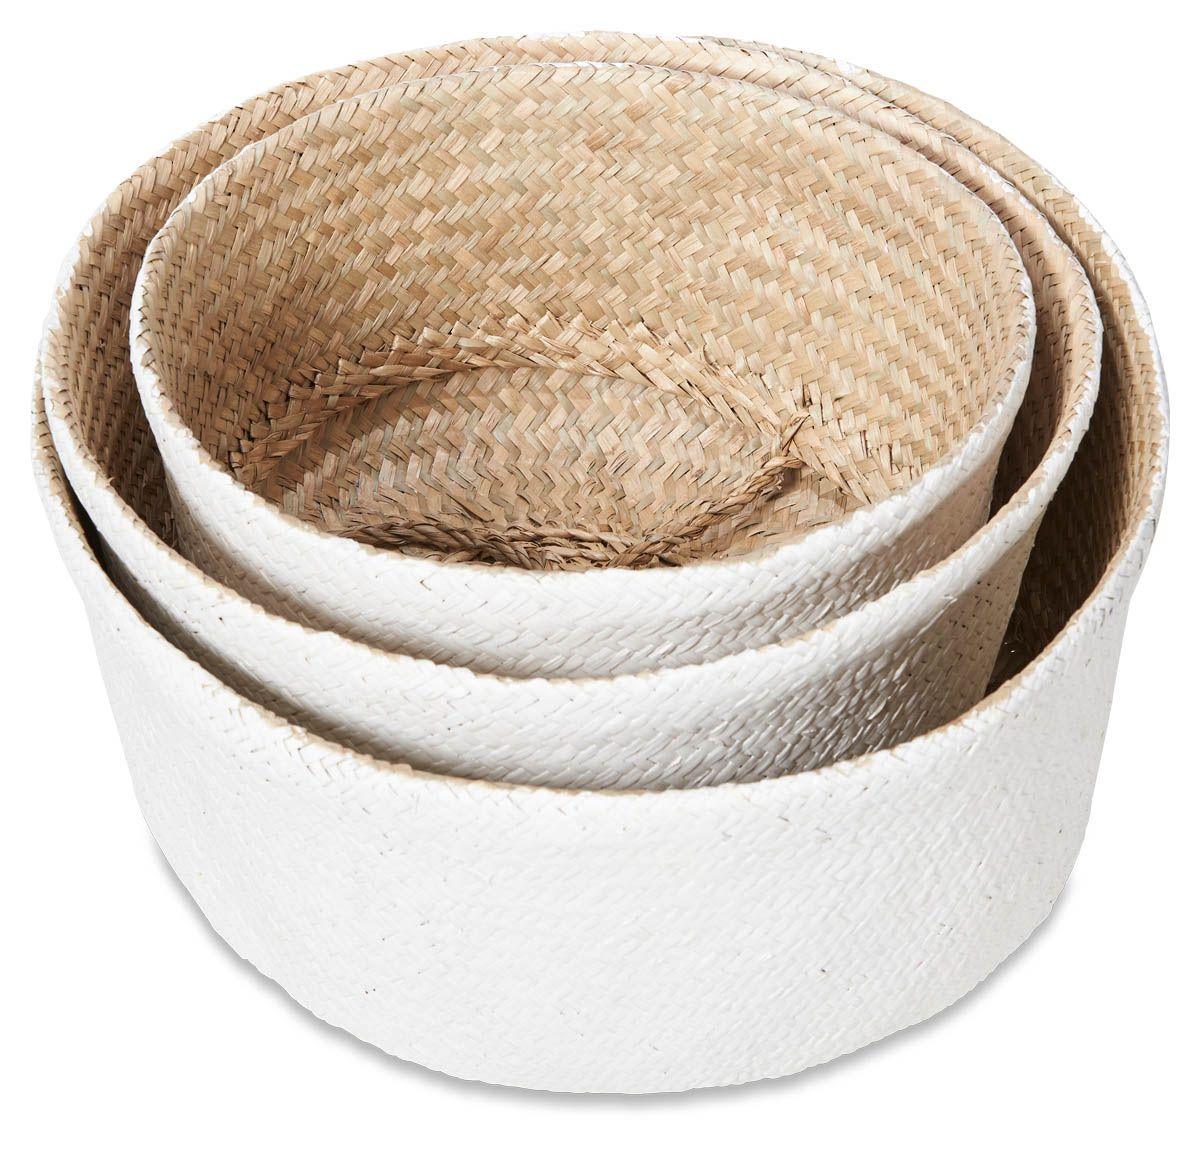 HG Living Set Of 3 Two Tone Foldable Seagrass Baskets Natural White - Storage BasketsEH099332092118532 3